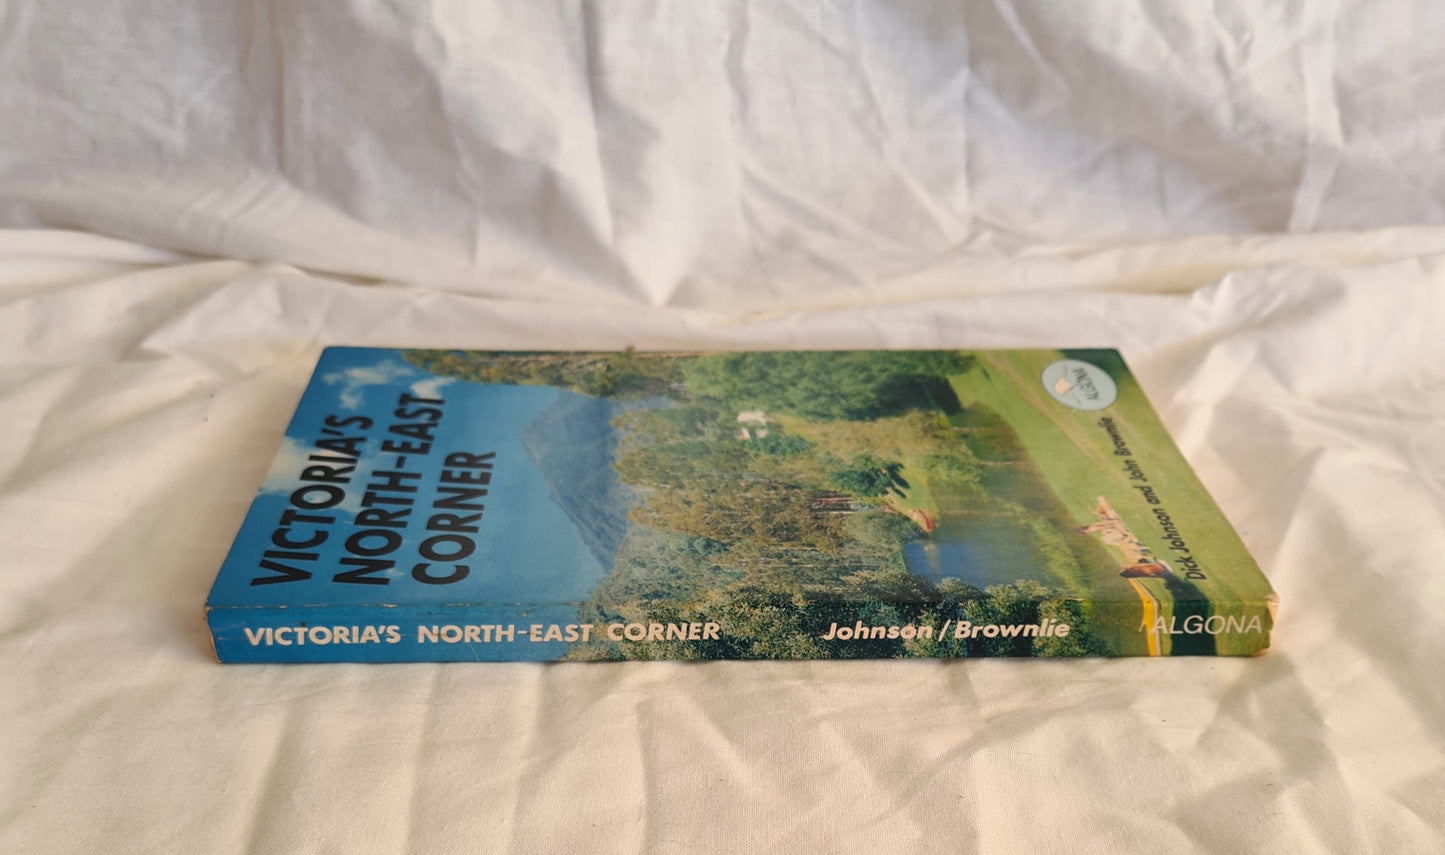 Victoria’s North-East Corner by Dick Johnson and John Brownlie